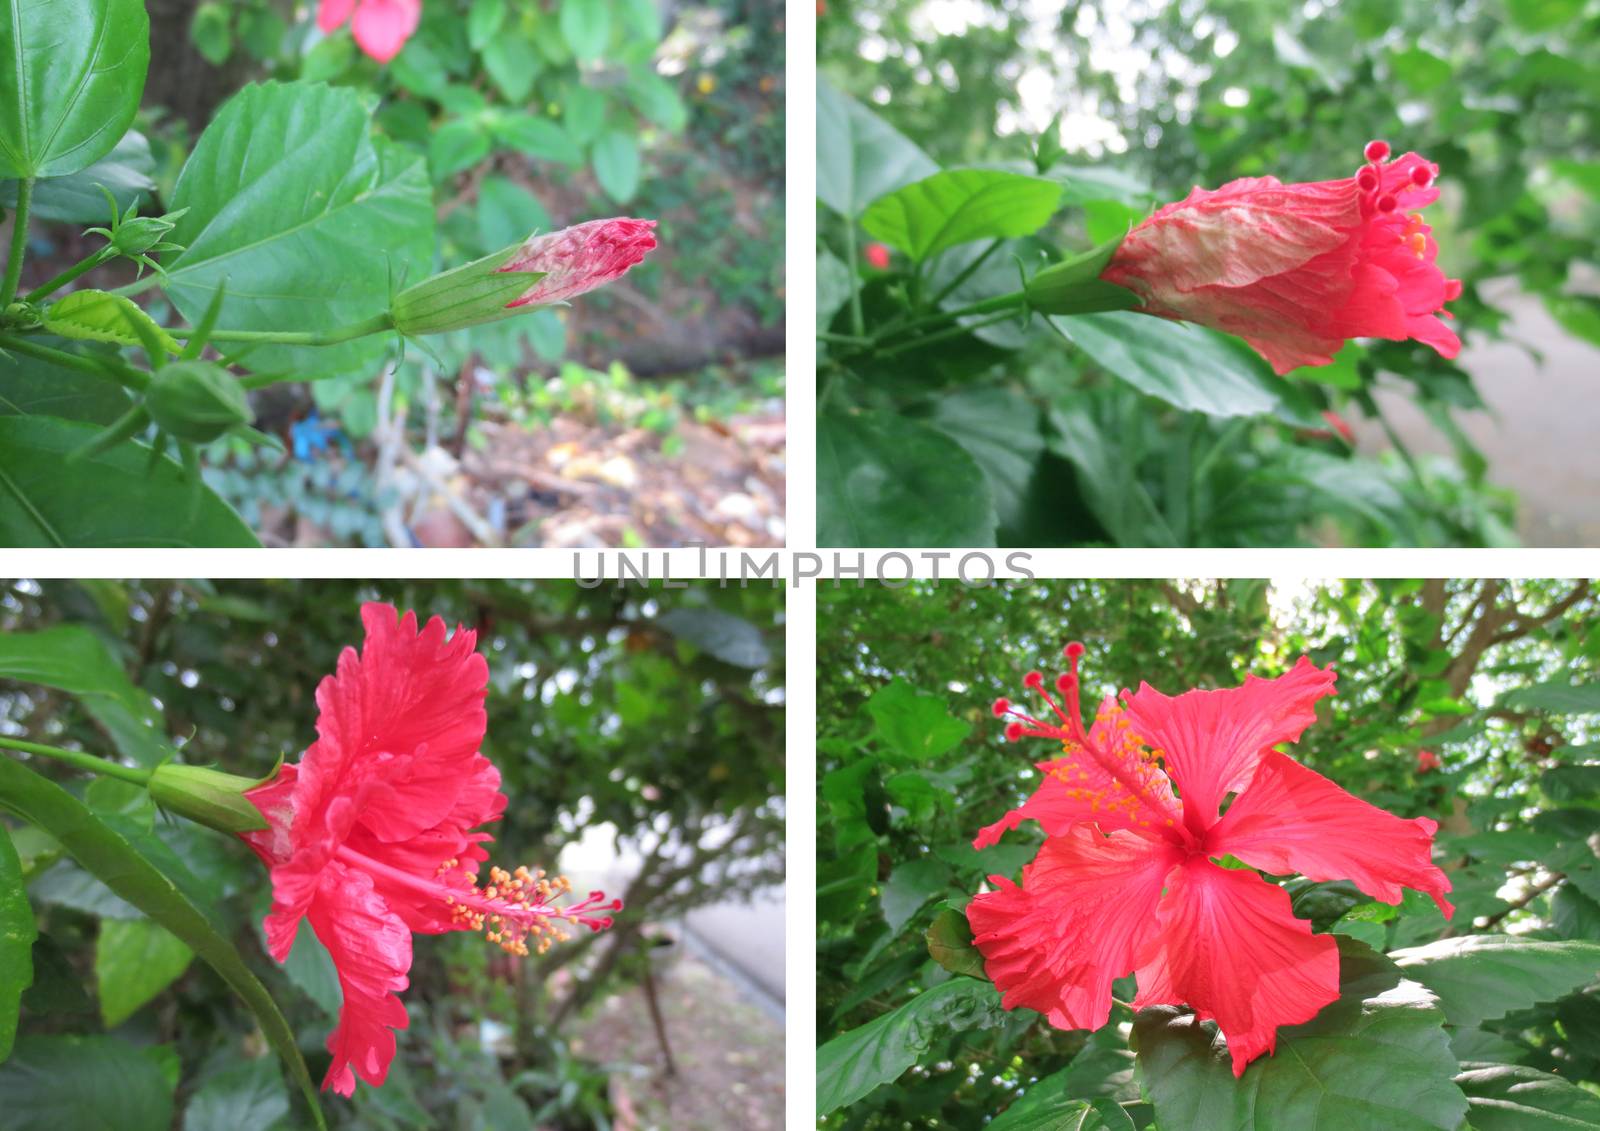 Time-lapse series of a hibiscus flower opening